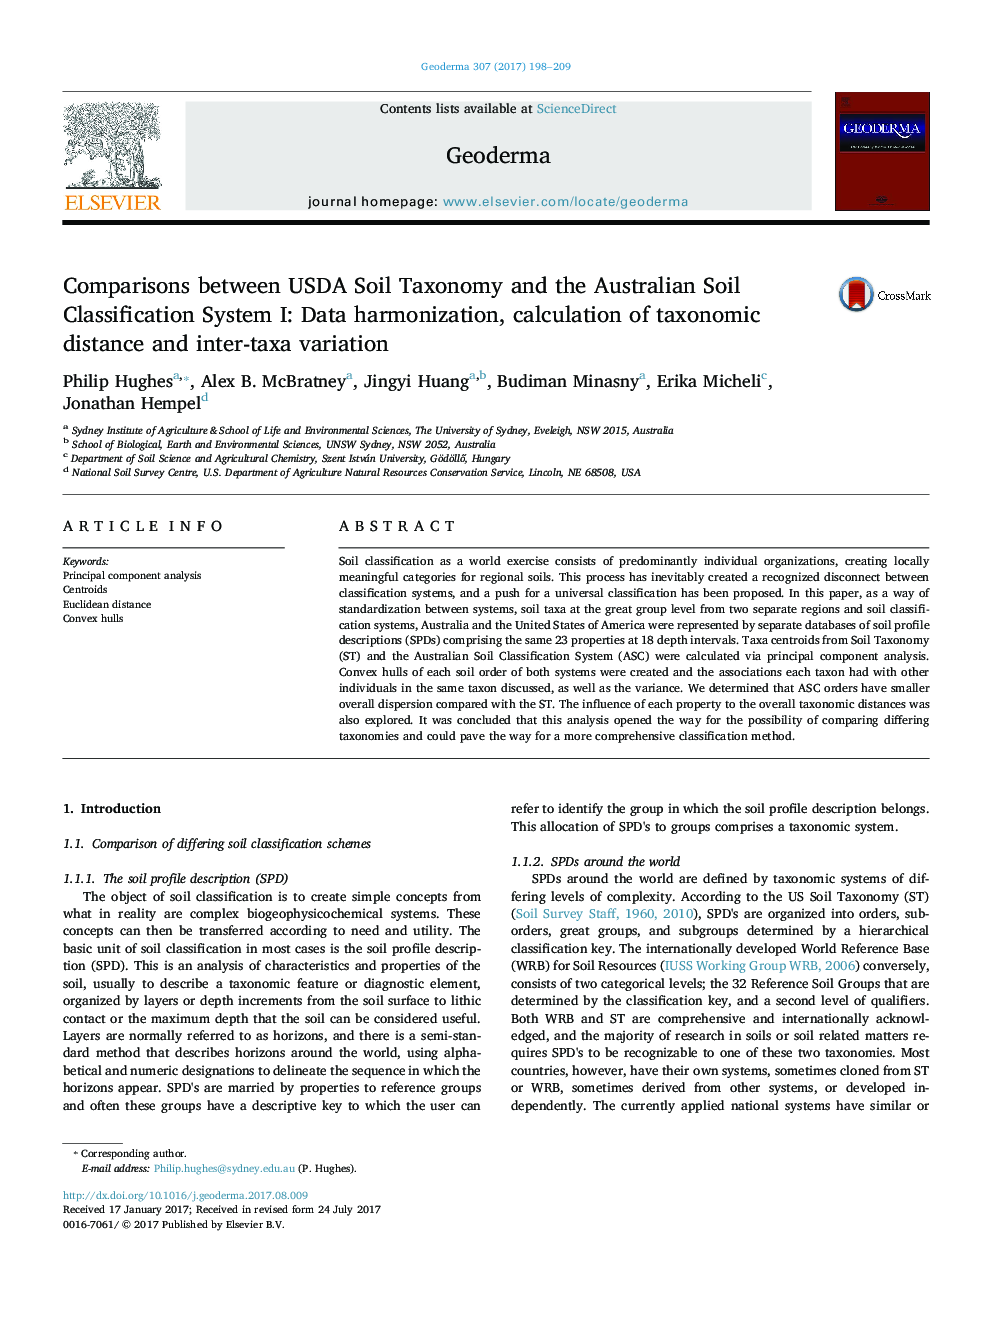 Comparisons between USDA Soil Taxonomy and the Australian Soil Classification System I: Data harmonization, calculation of taxonomic distance and inter-taxa variation